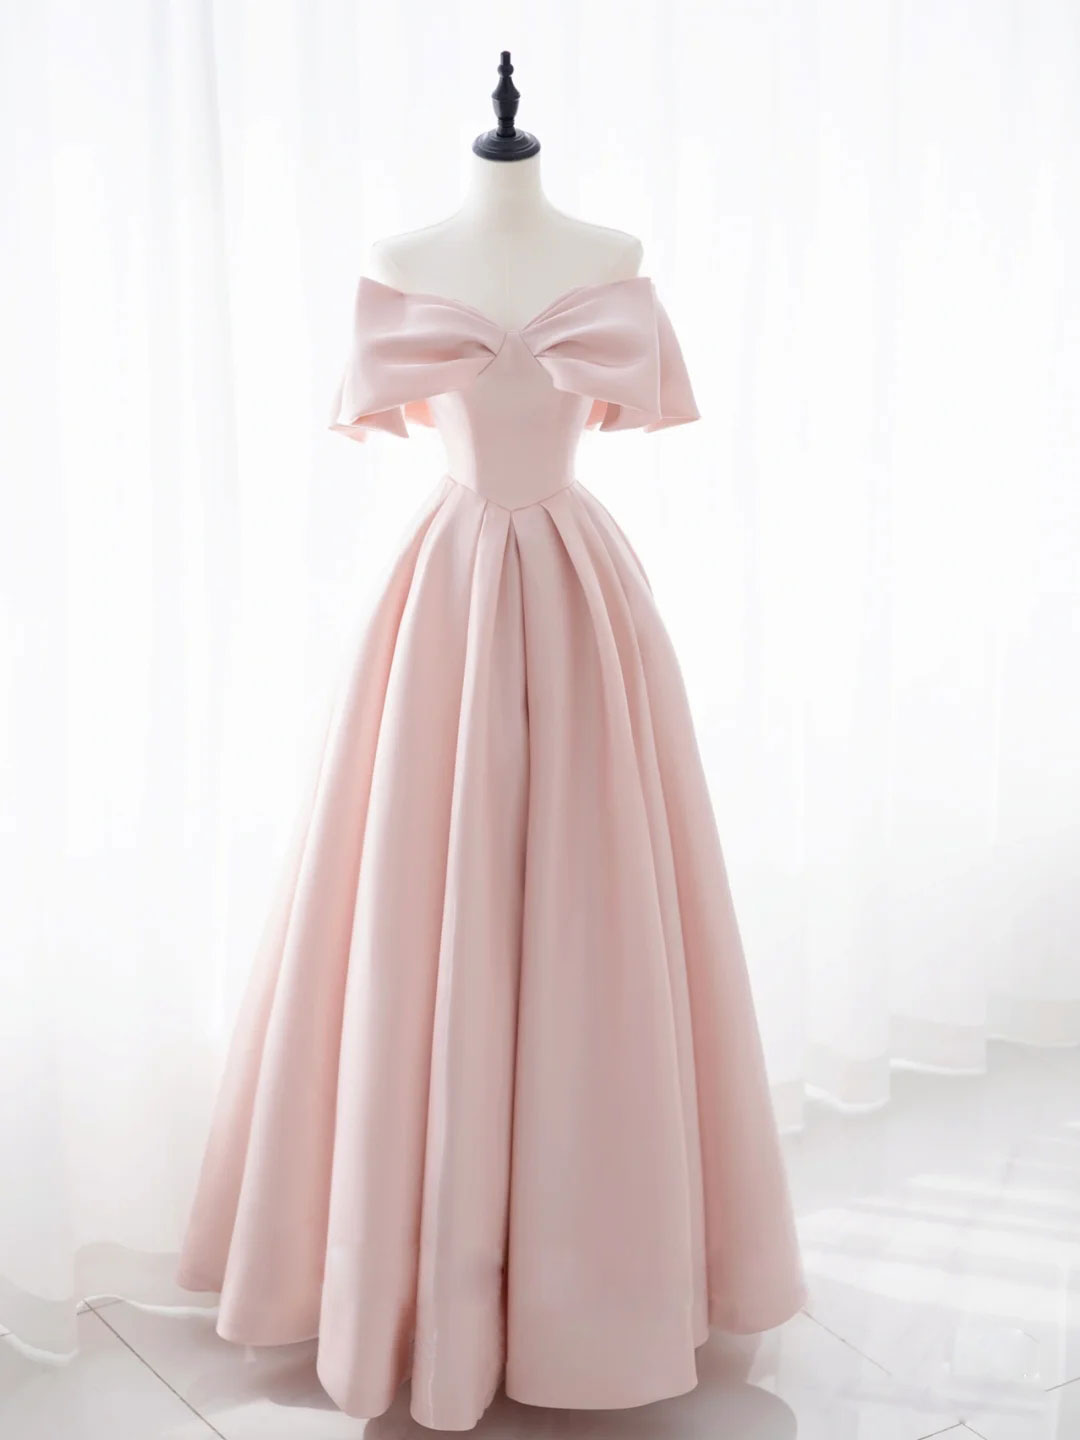 Party Dress Shops Near Me, Simple Pink Satin Long Prom Dresses, Pink Bridesmaid Dresses